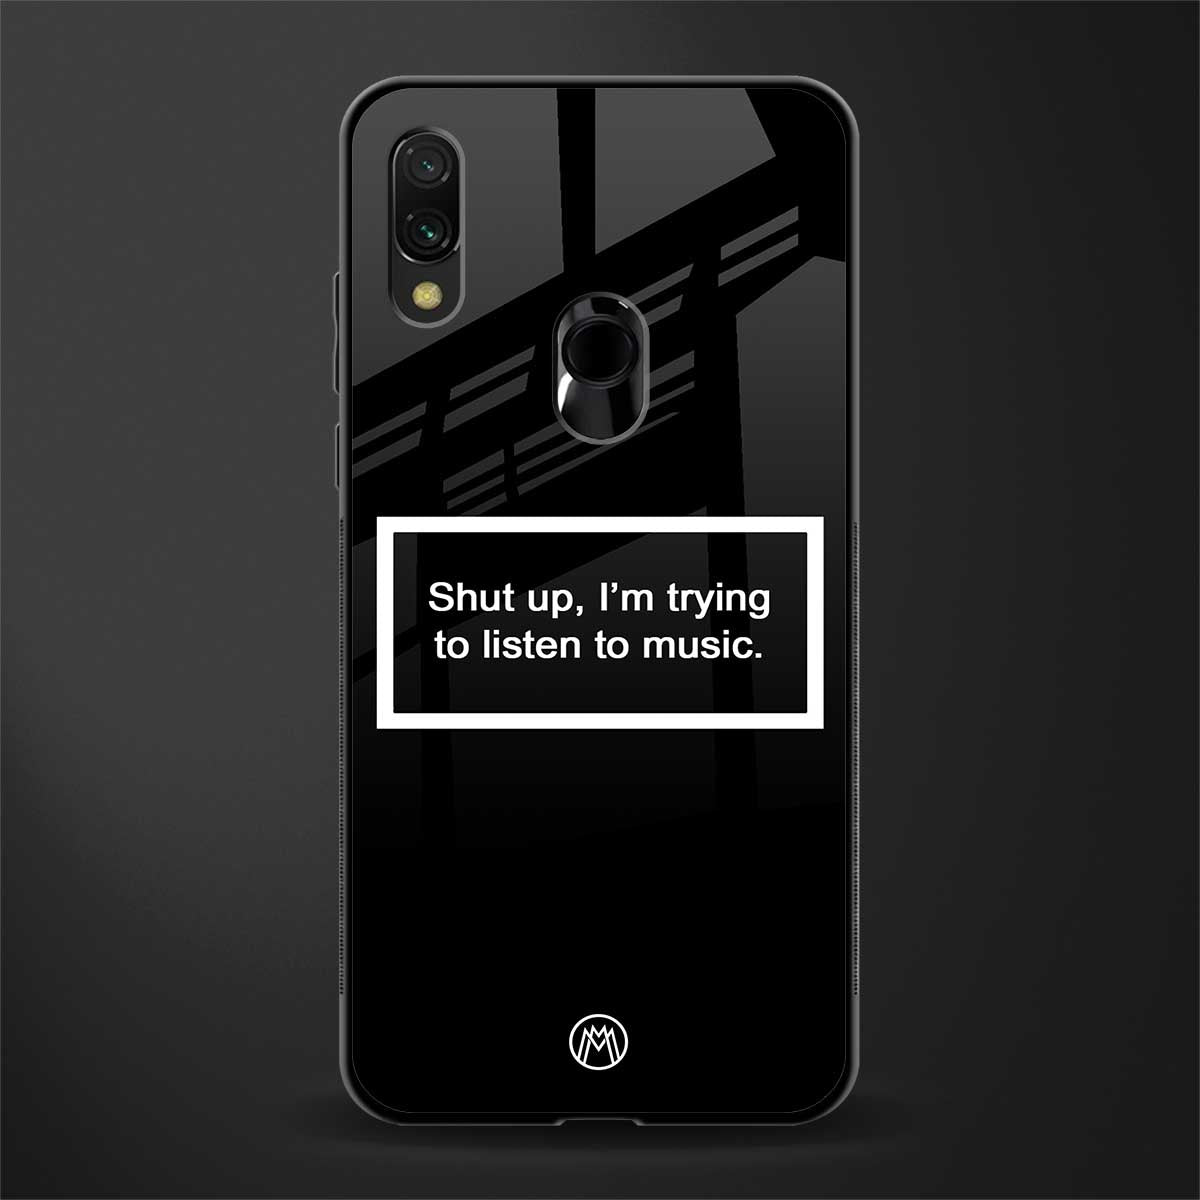 shut up and listen to music black glass case for redmi note 7 pro image